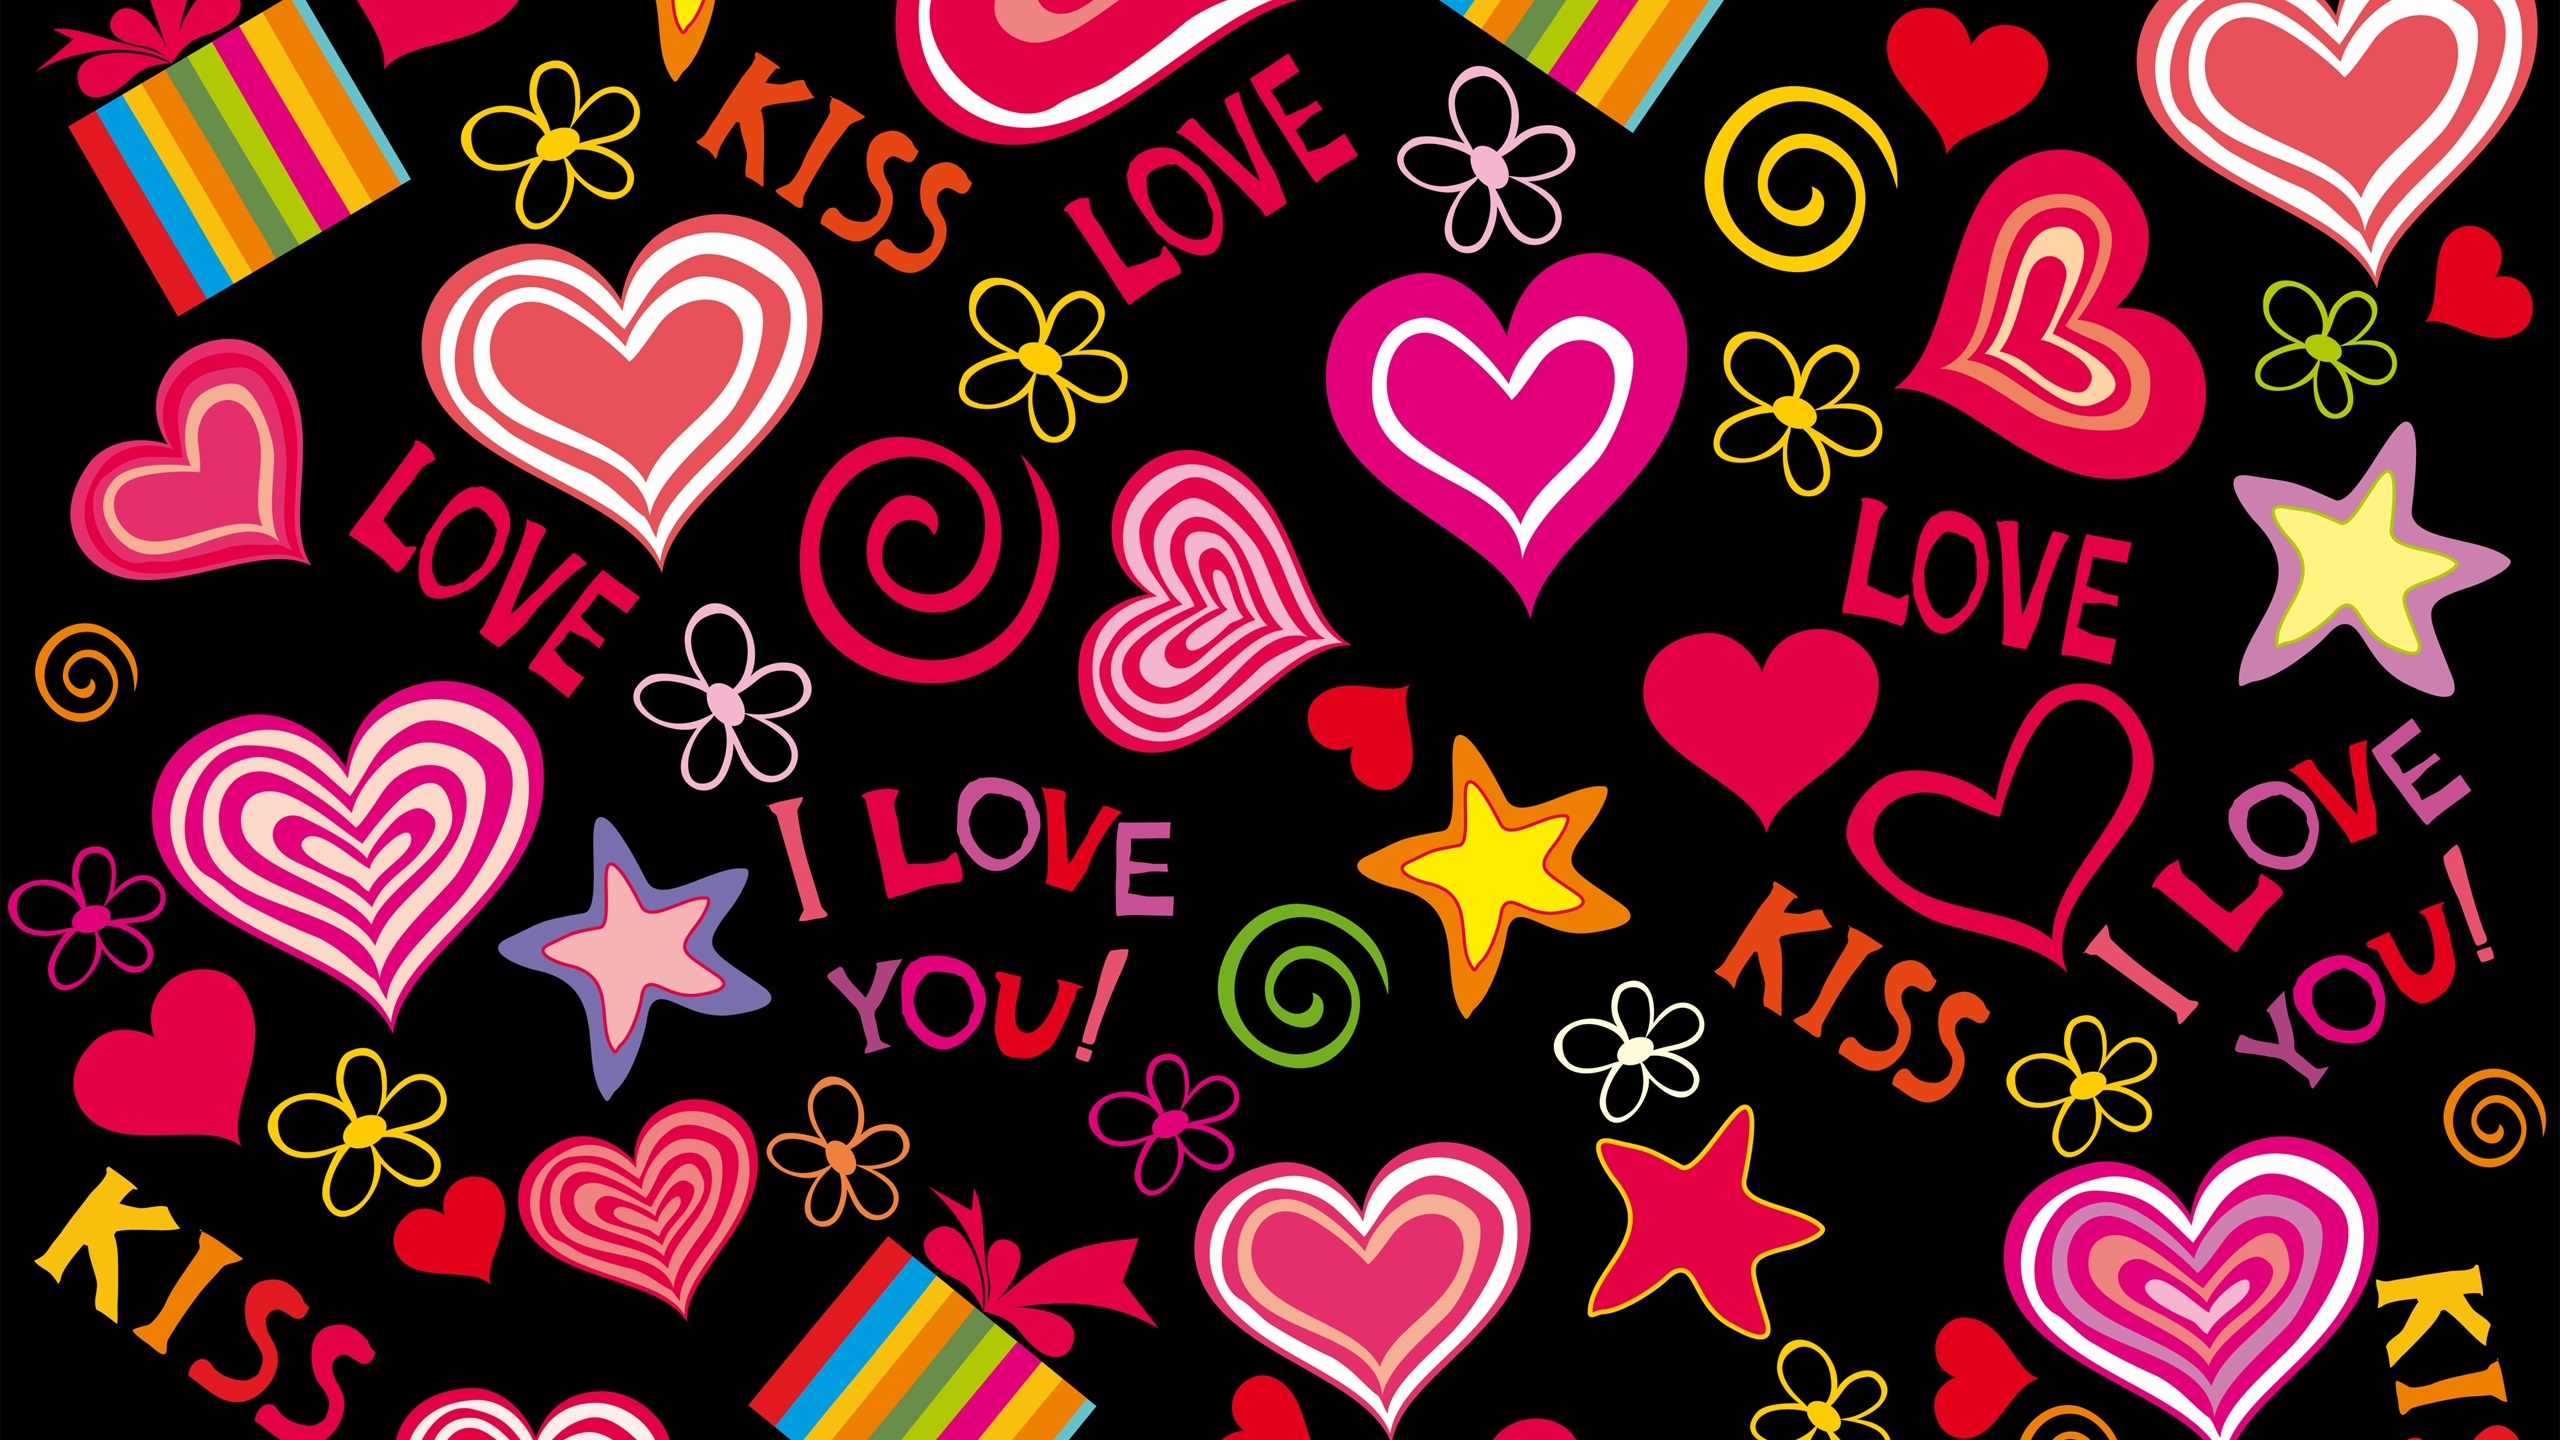 Love Note Kiss Note Colorful 2560x1440